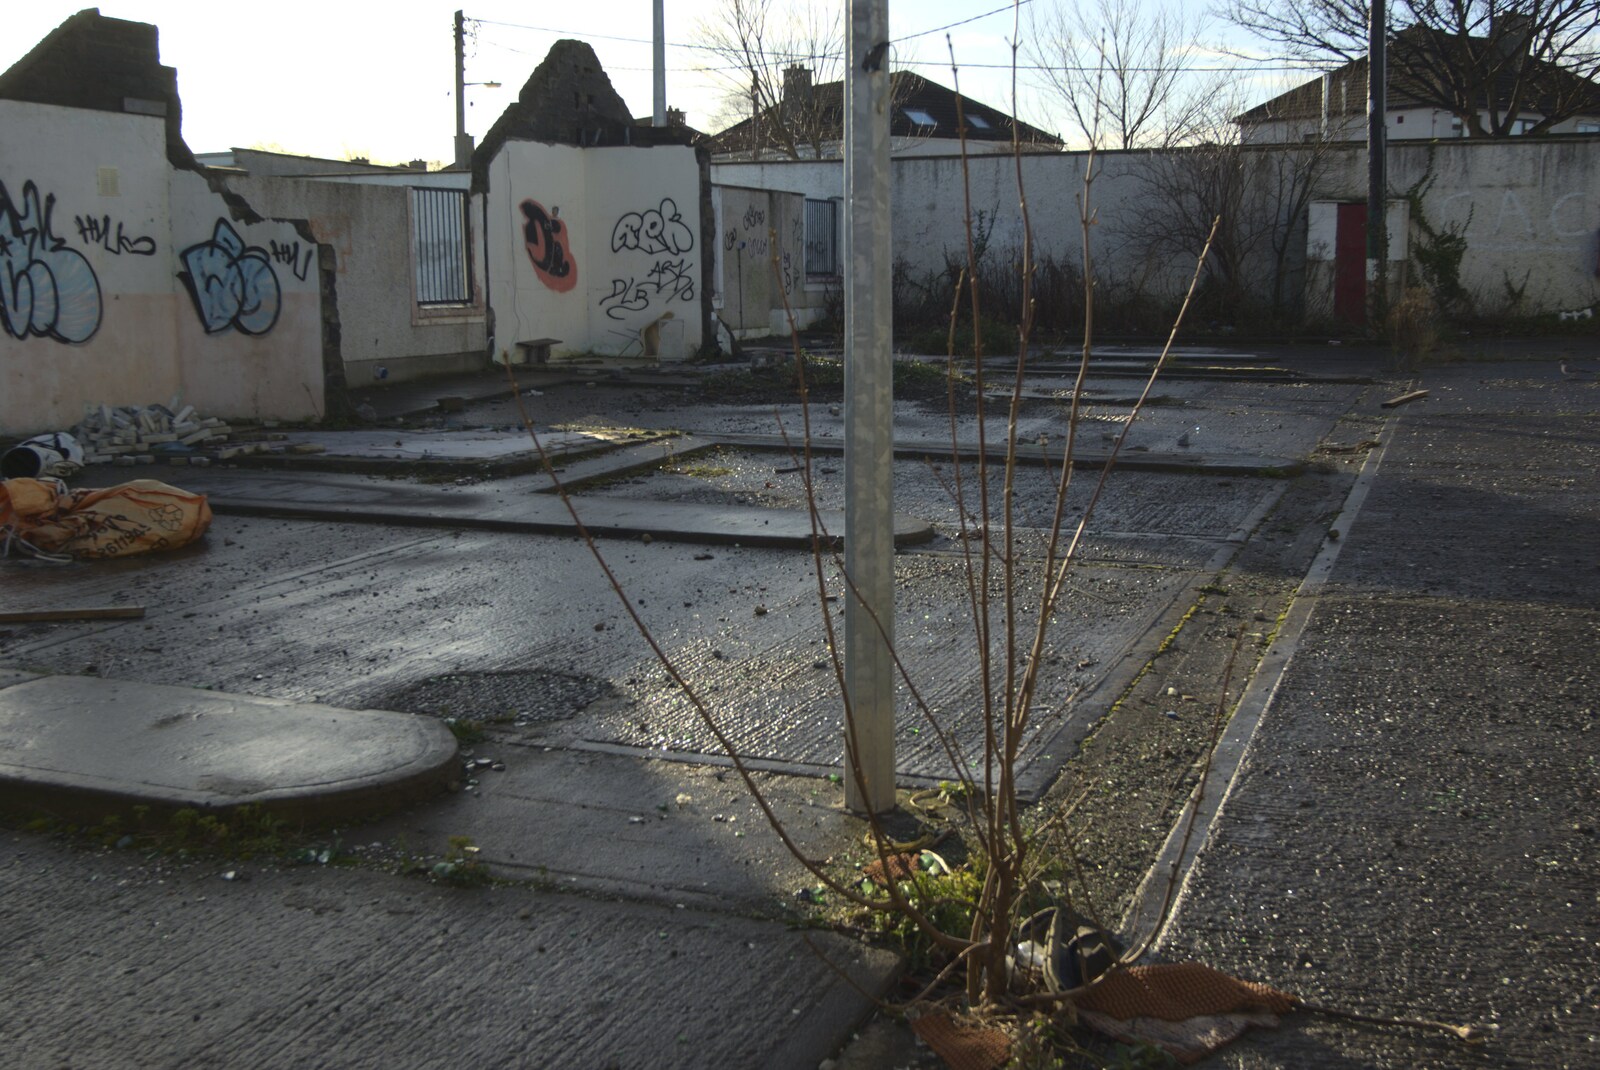 A tree grows in the derelict building from Monkstown Graffiti and Dereliction, County Dublin, Ireland - 26th December 2009